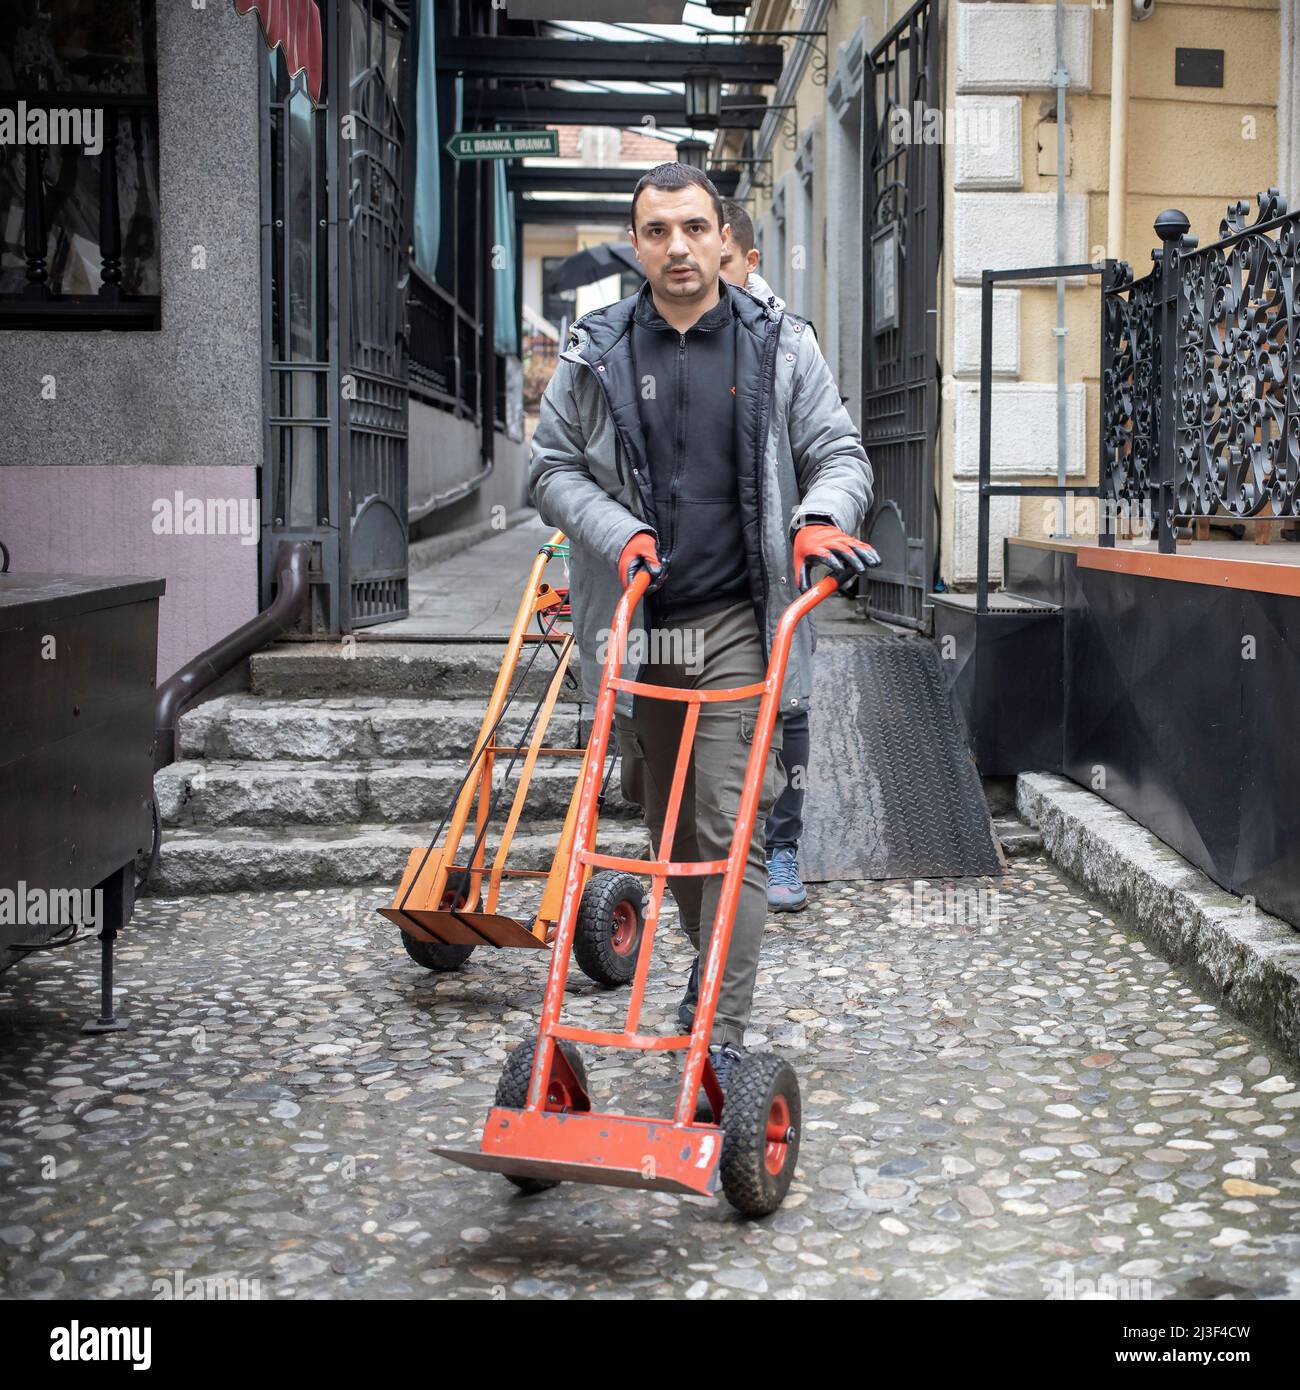 Belgrade, Serbia, Apr 7, 2022: Worker pushing empty upright trolley after delivery Stock Photo